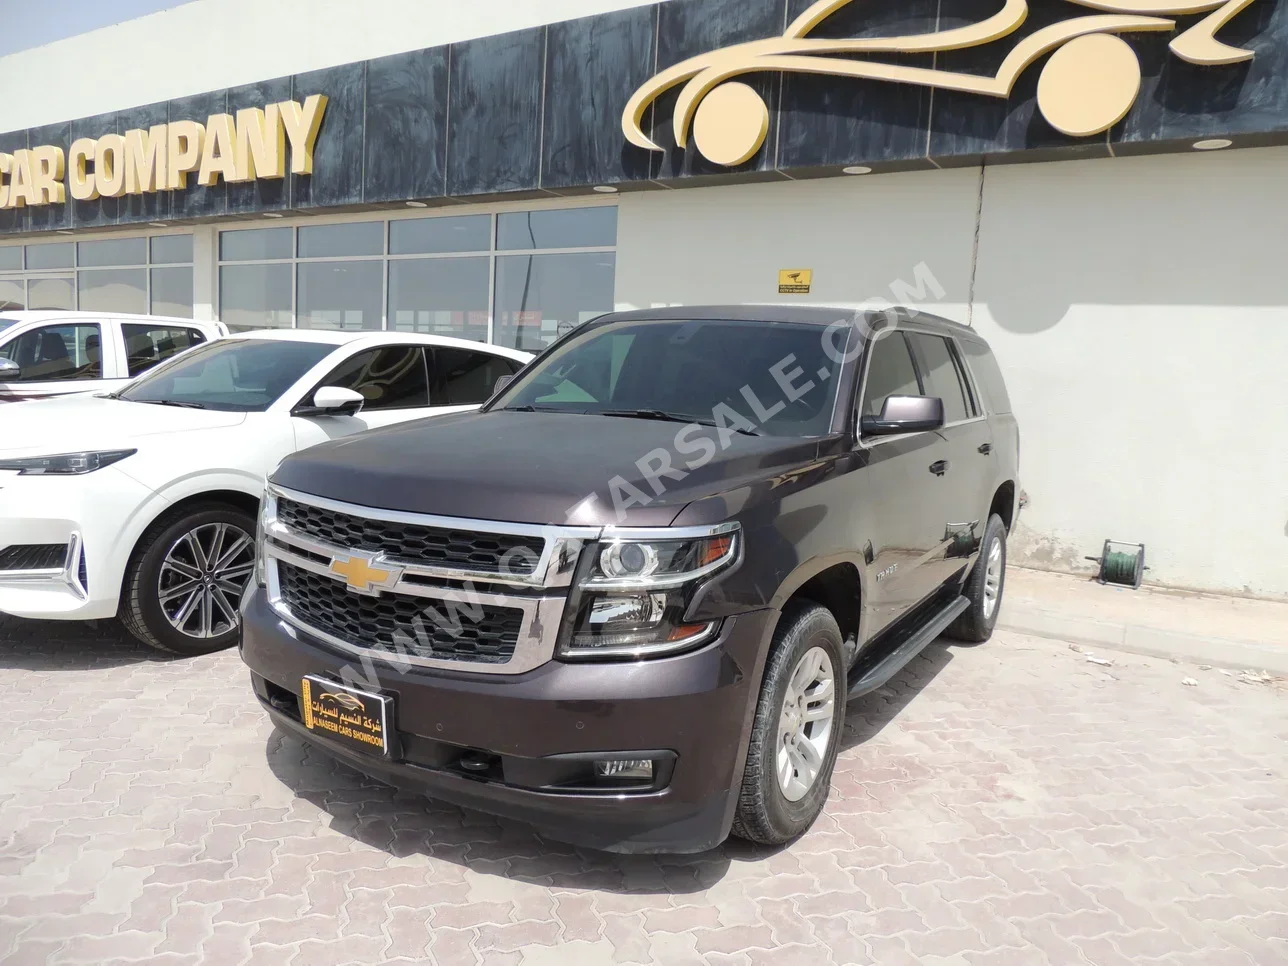 Chevrolet  Tahoe  2016  Automatic  112,000 Km  8 Cylinder  Four Wheel Drive (4WD)  SUV  Brown